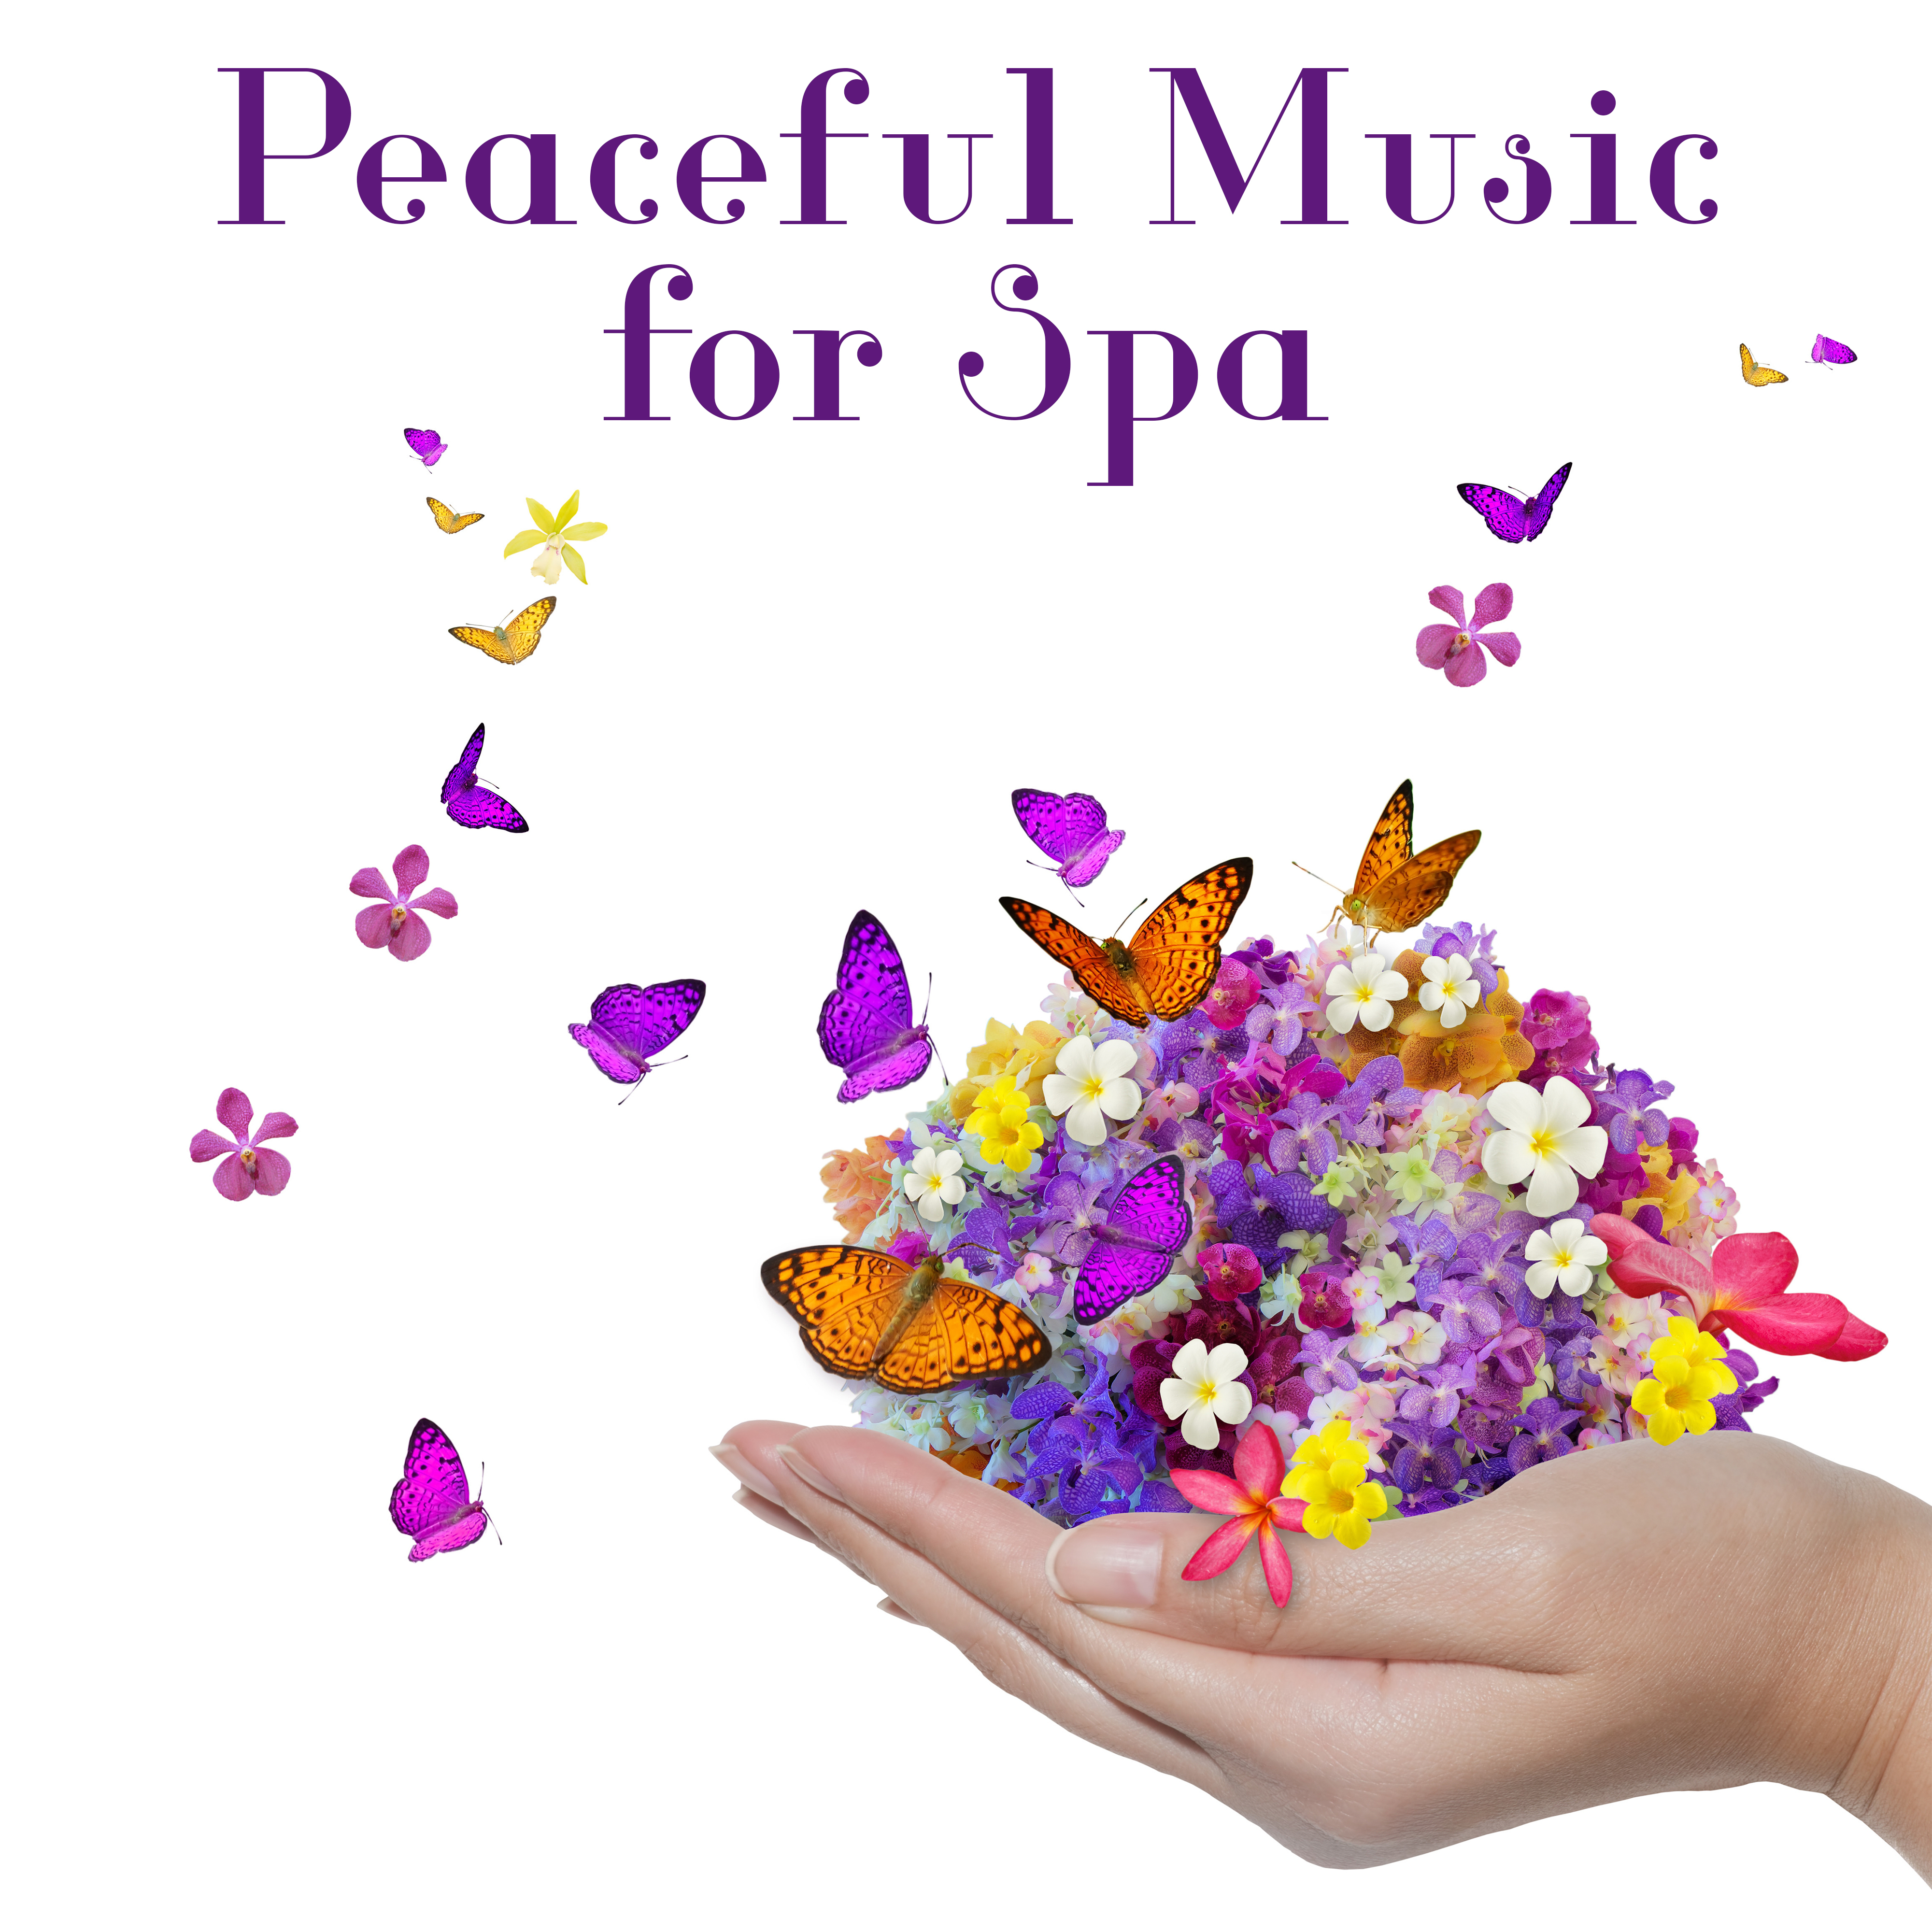 Peaceful Music for Spa  Relaxation Wellness, Pure Massage, Calm Mind, Stress Relief, Spa Music, Zen, Healing Sounds, Massage Therapy